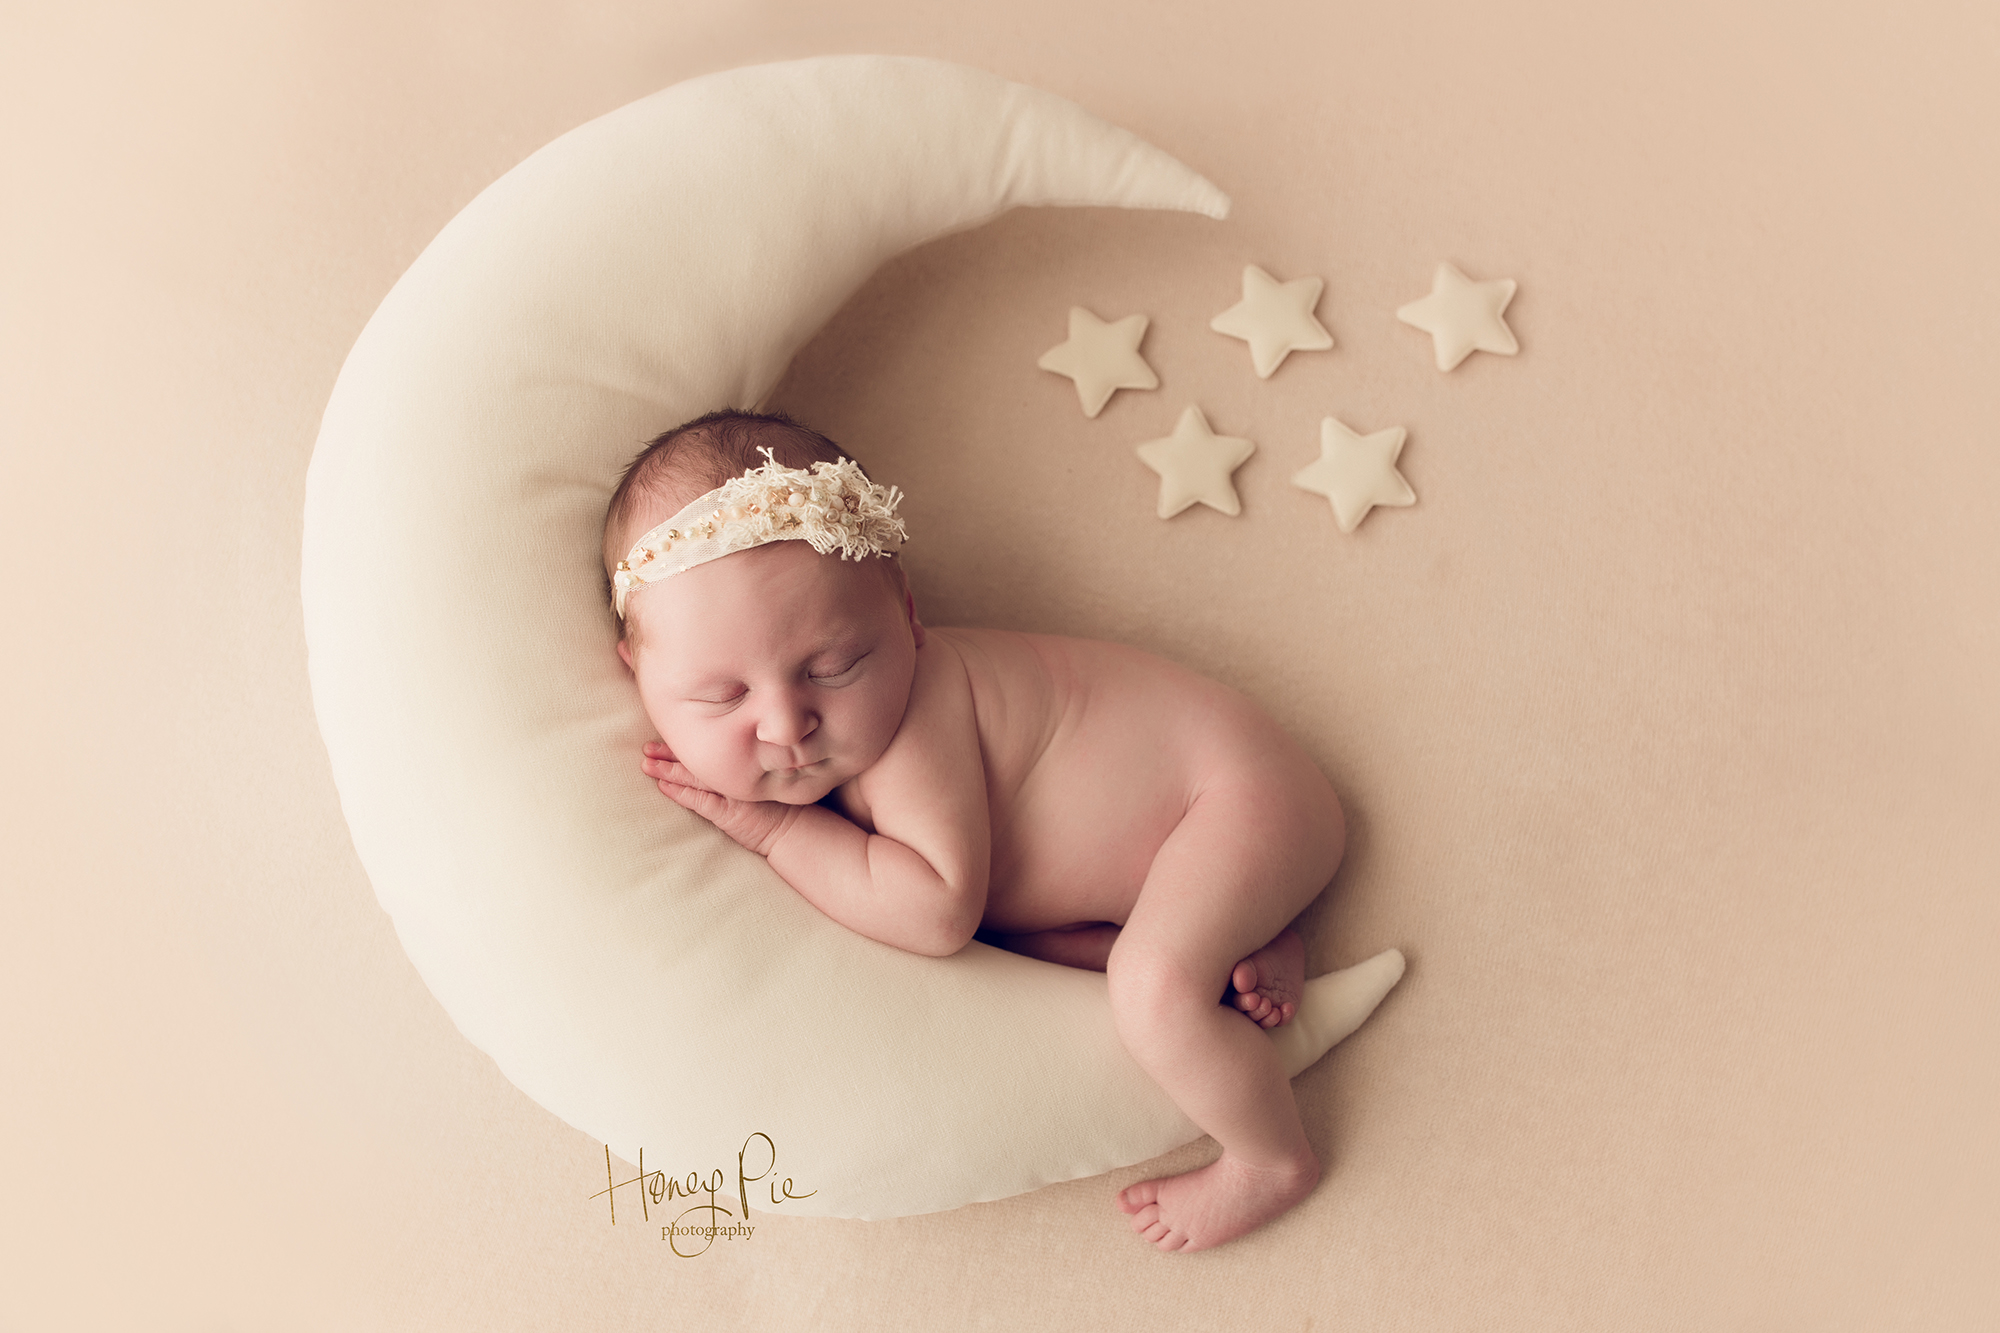 Newborn baby girl sleeping cuddled into a large moon pillow during west sussex newborn photoshoot